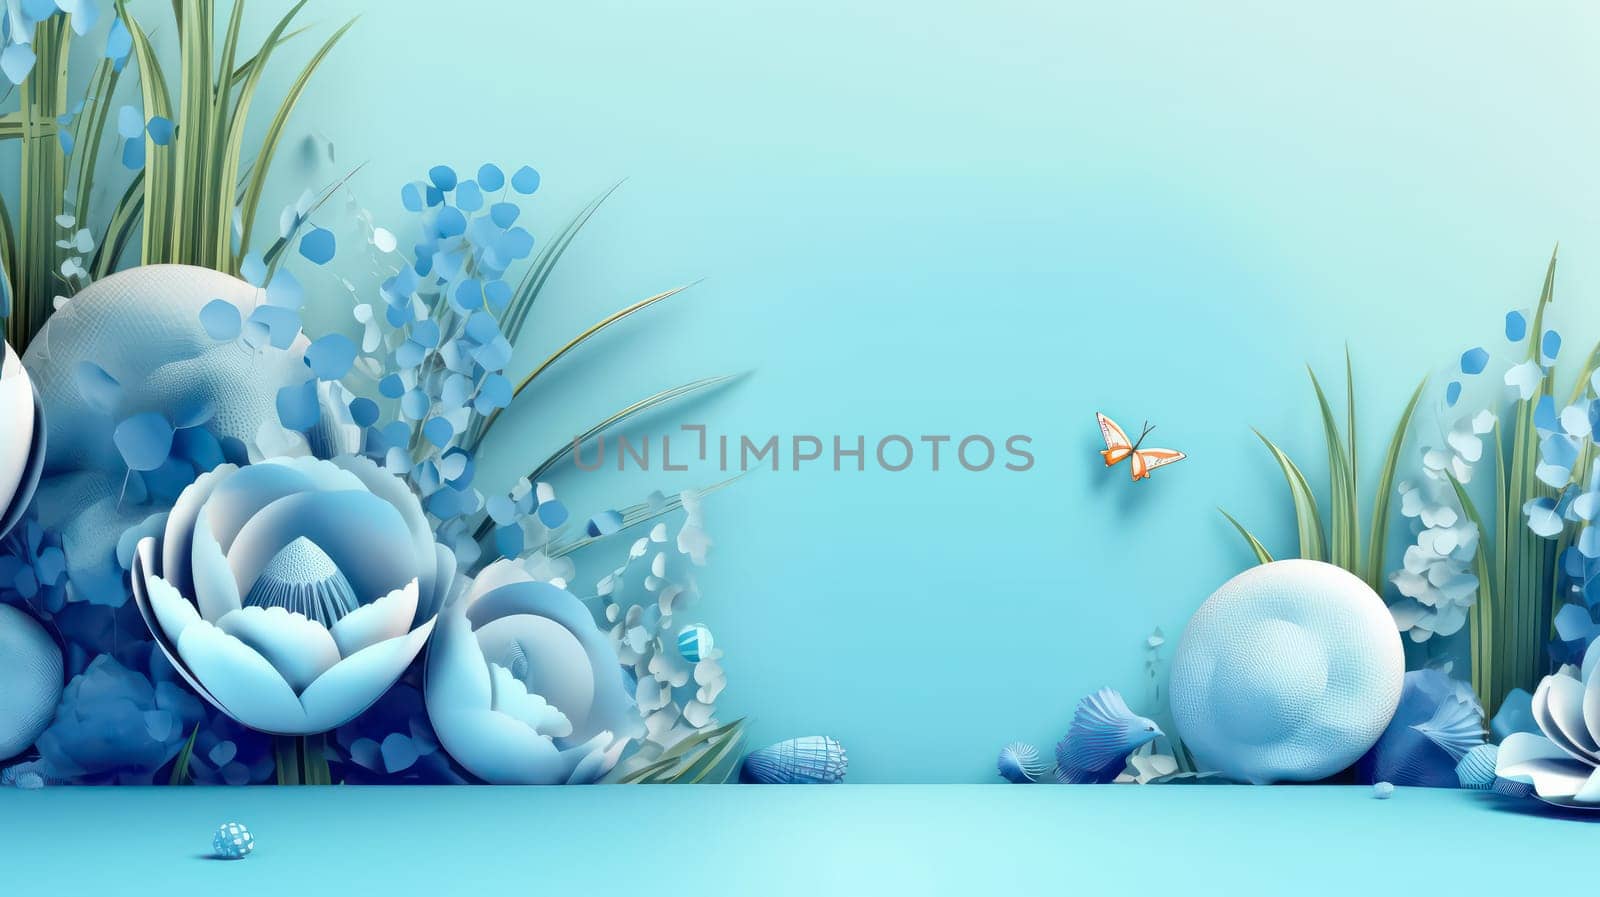 Celebrate Easter with this vibrant background adorned with colorful flowers by Alla_Morozova93